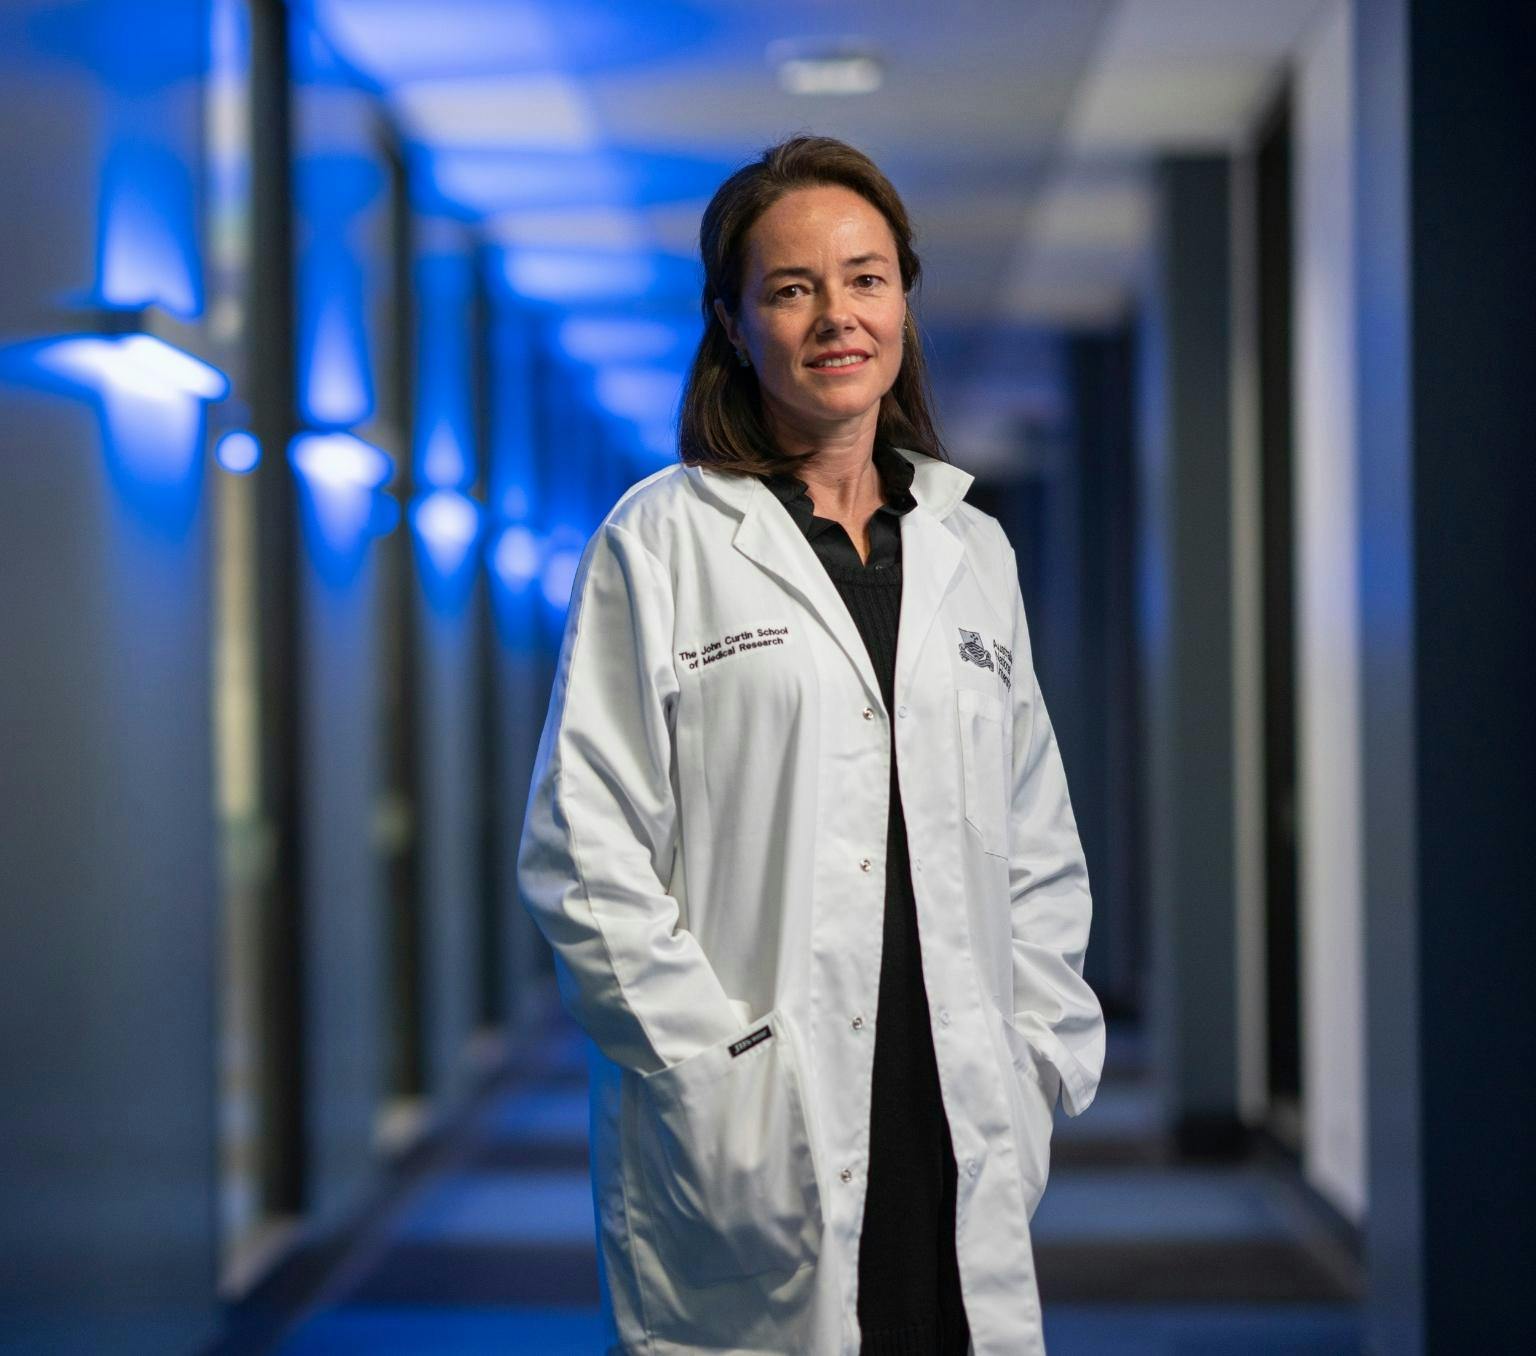 Carola is pictured in a corridor illuminated by blue lights. She is looking at the camera and wearing a white lab coat